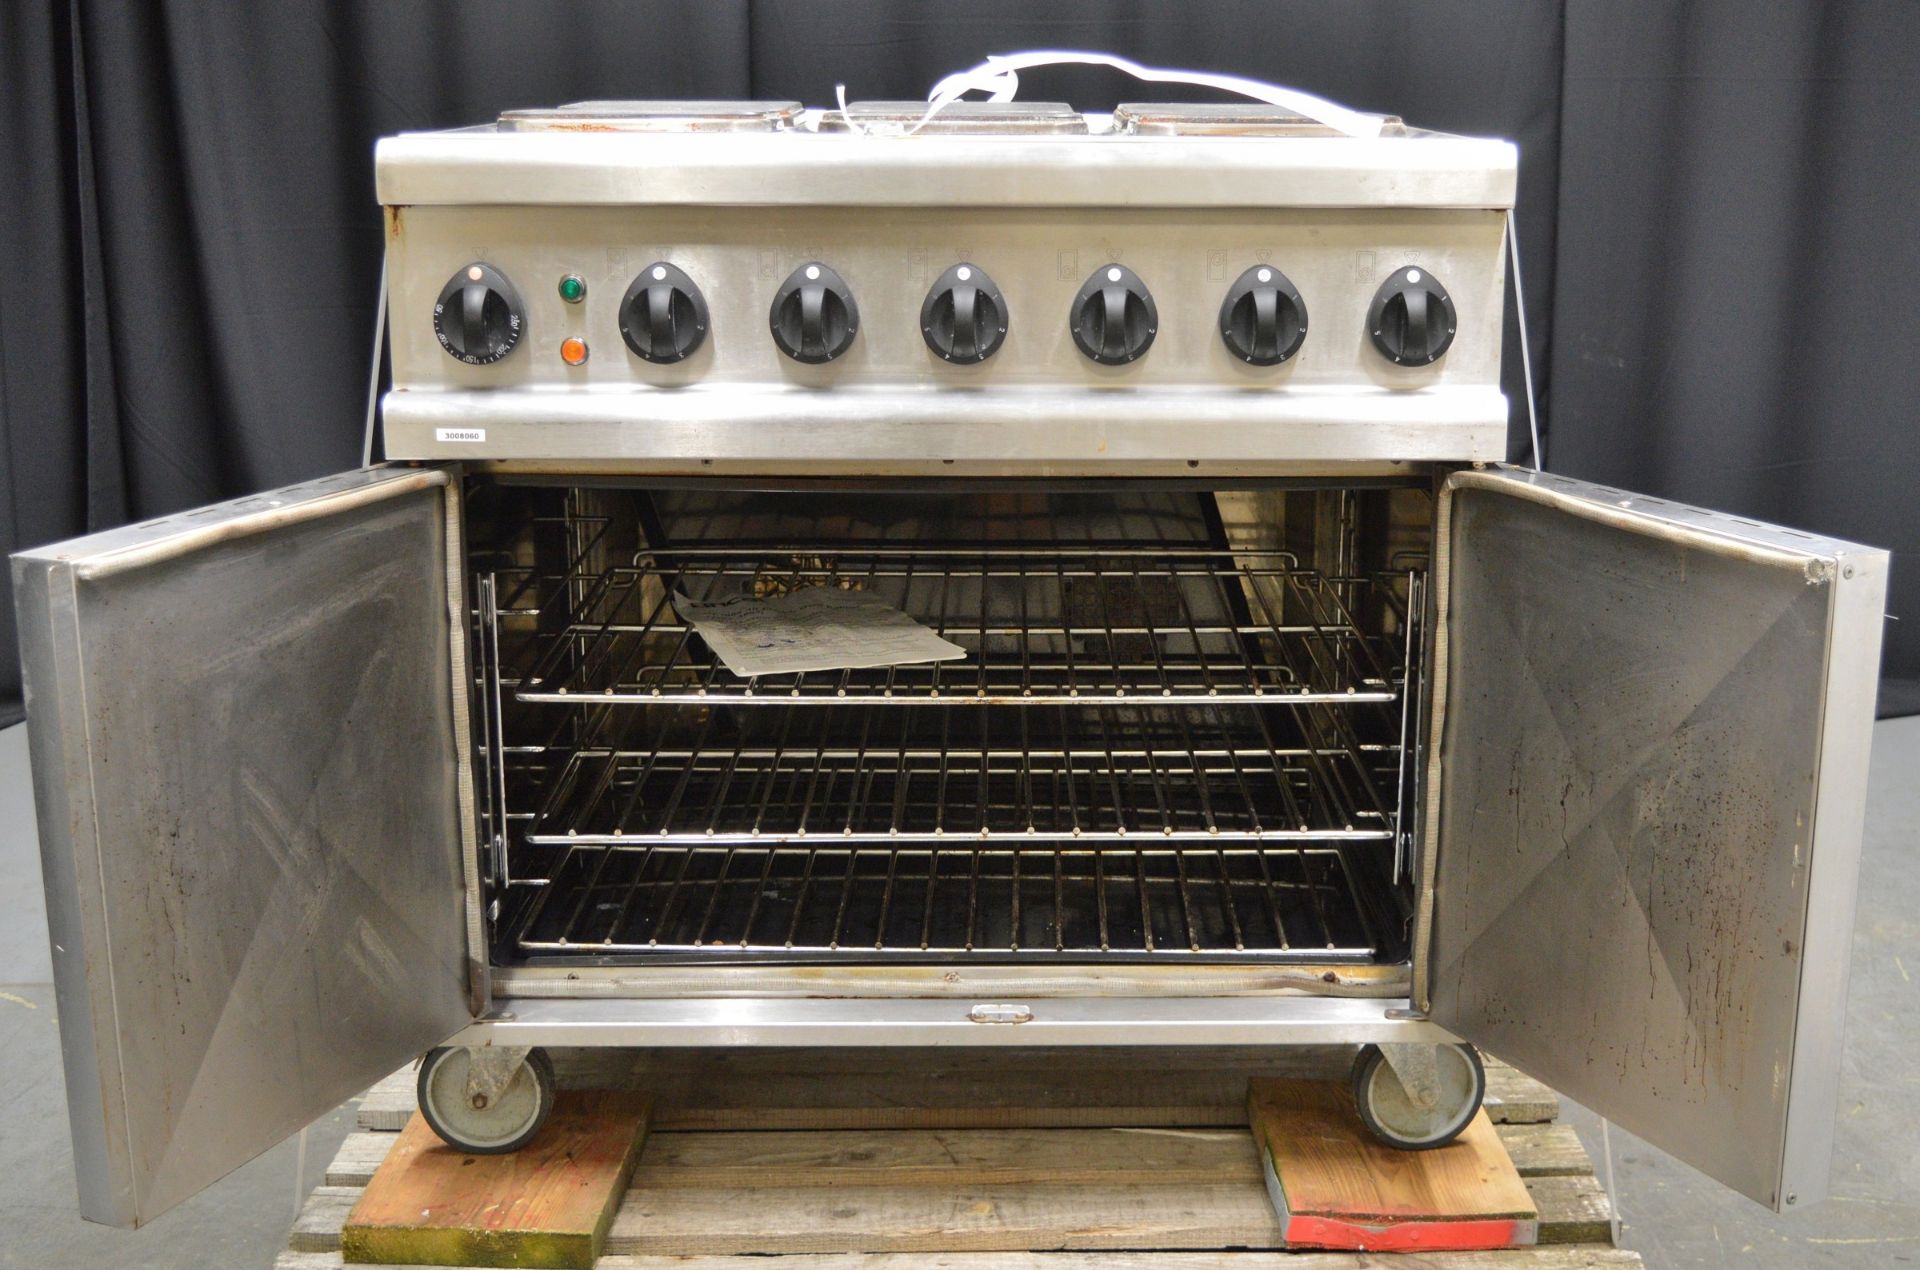 Lincat OE7008 6 Plate All Electric Range Oven - 440v - Image 5 of 7